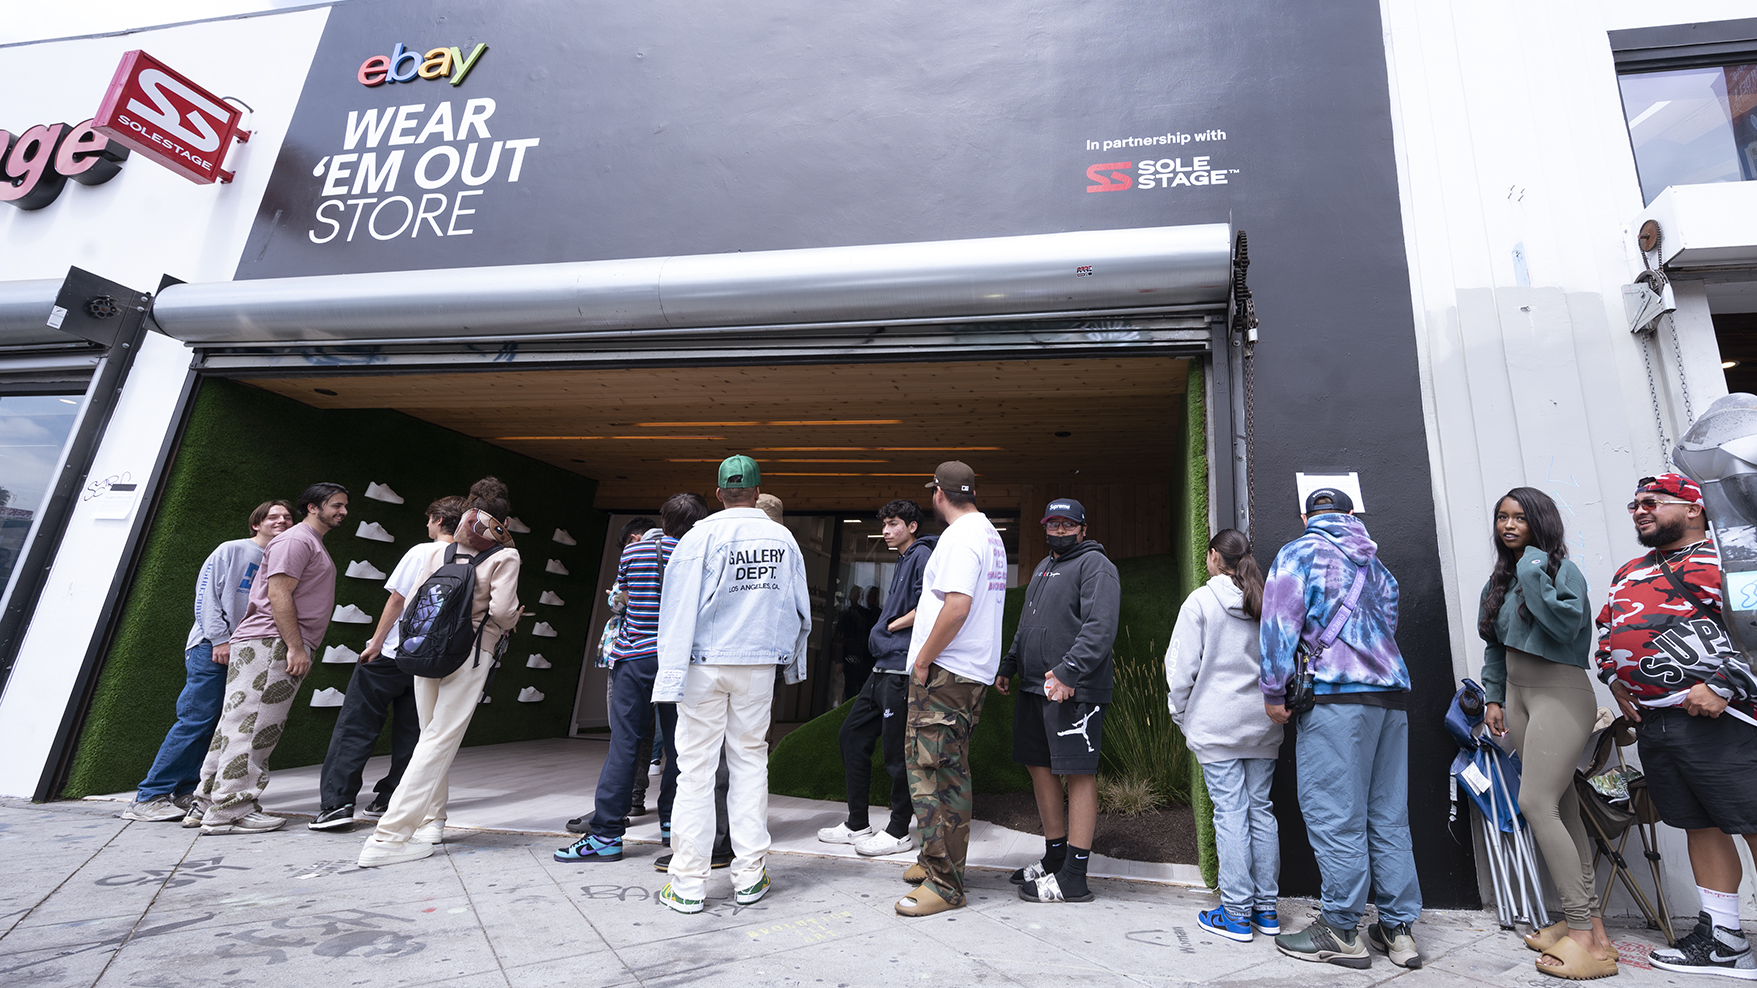 eBay Celebrates Sneakerheads Who Wear Sneakers Out Of The Store With Fairfax Pop-Up Shop